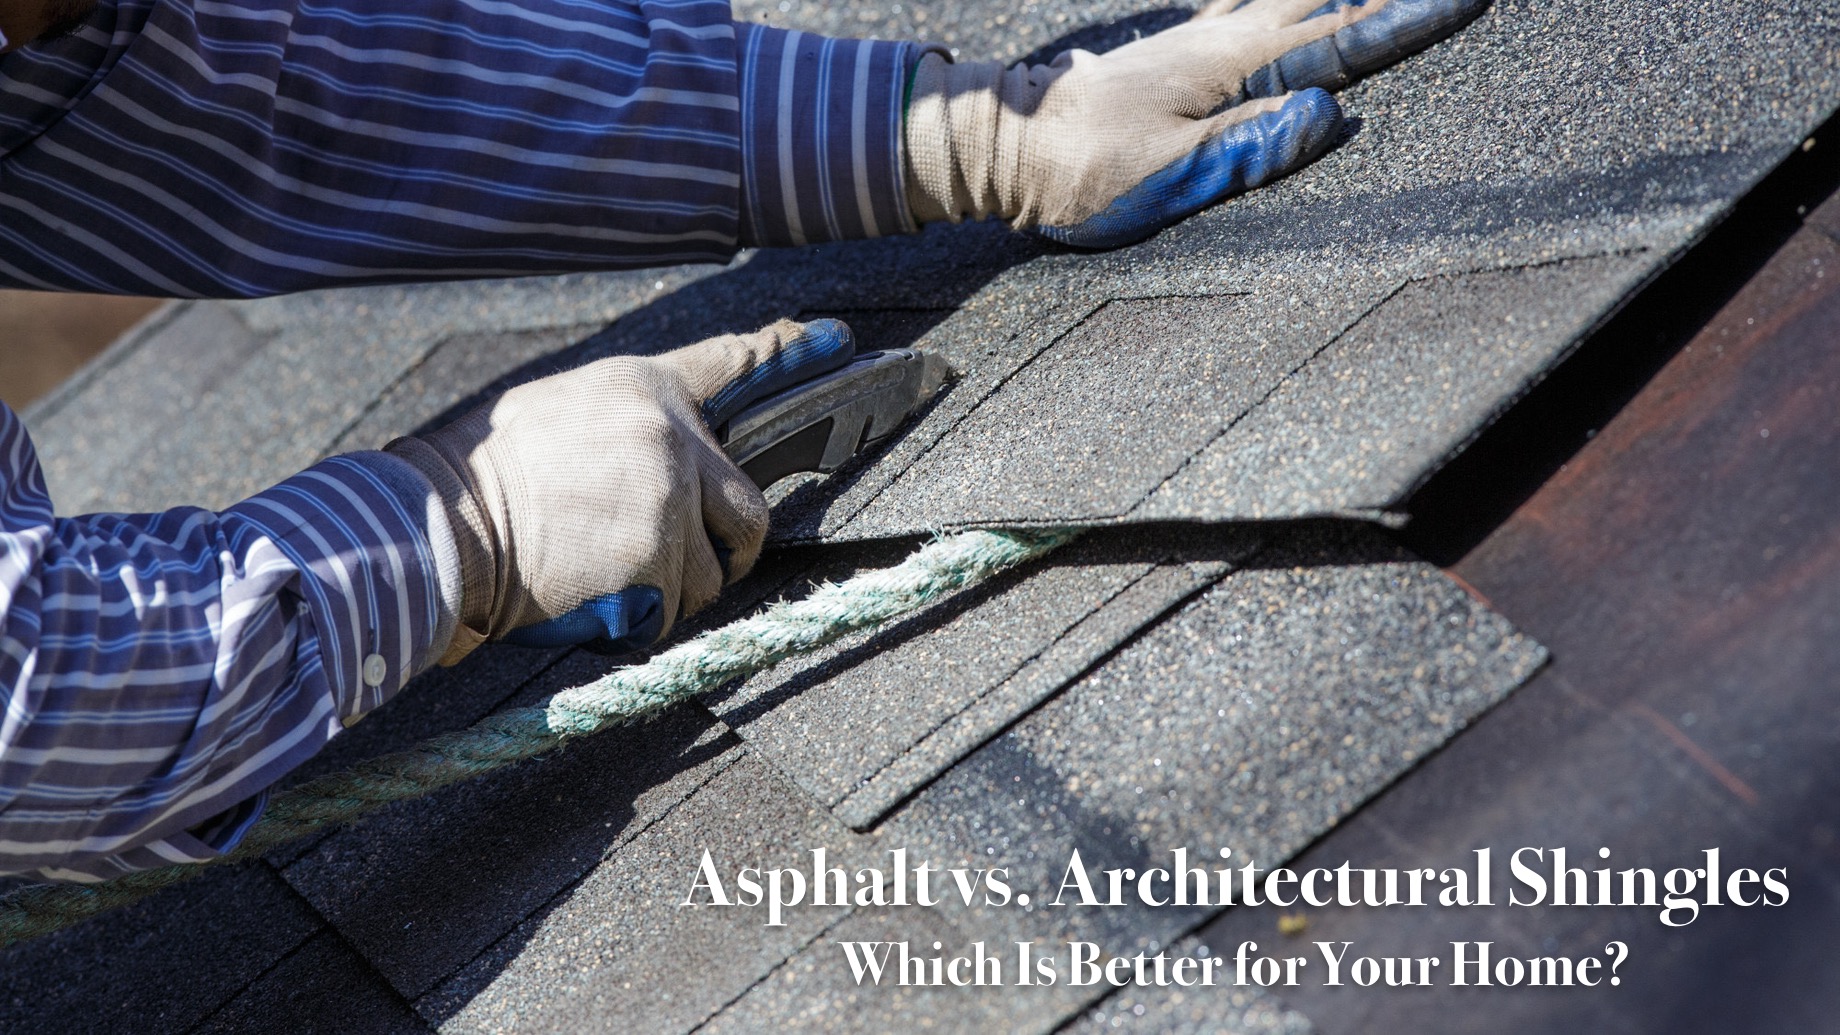 Asphalt vs. Architectural Shingles - Which Is Better for Your Home?